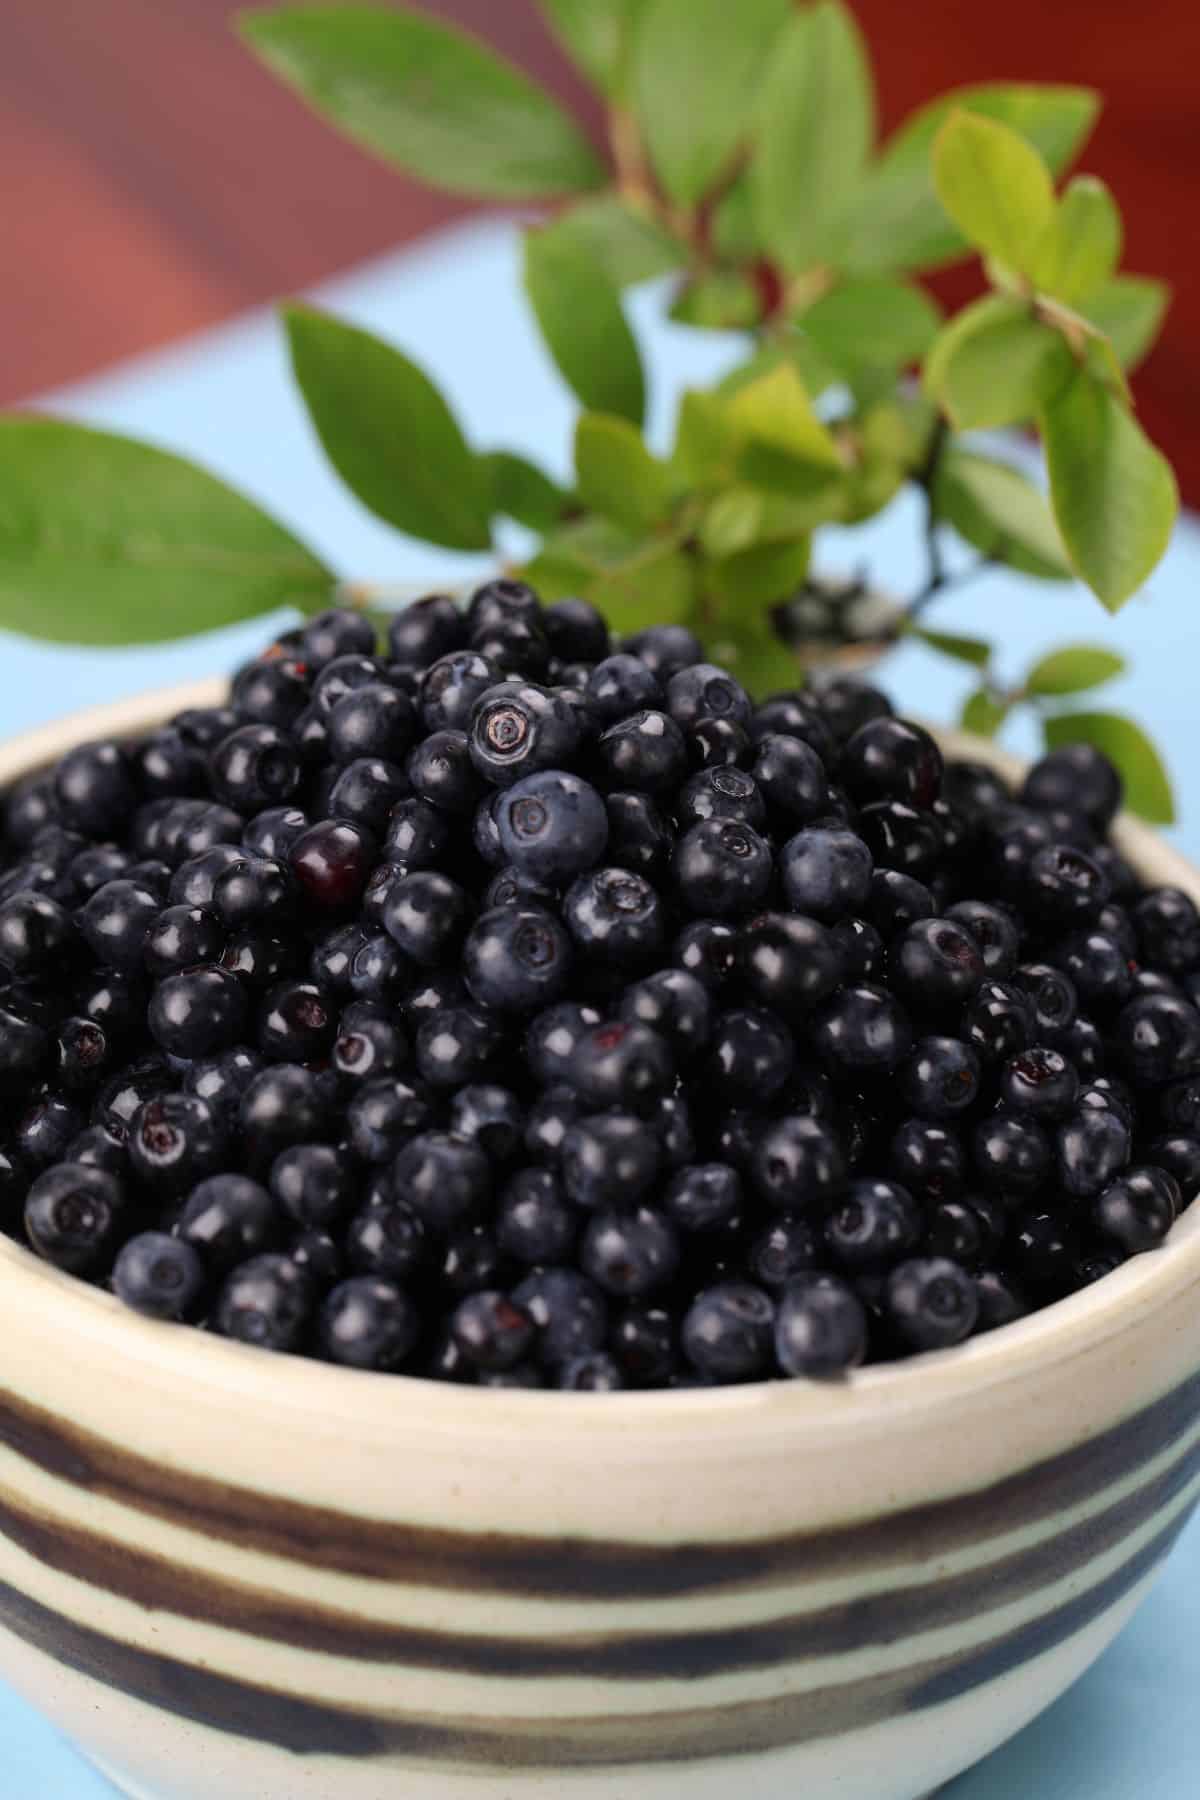 A white ceramic bowl of dark-colored wild blueberries that are slightly smaller than normal blueberries.